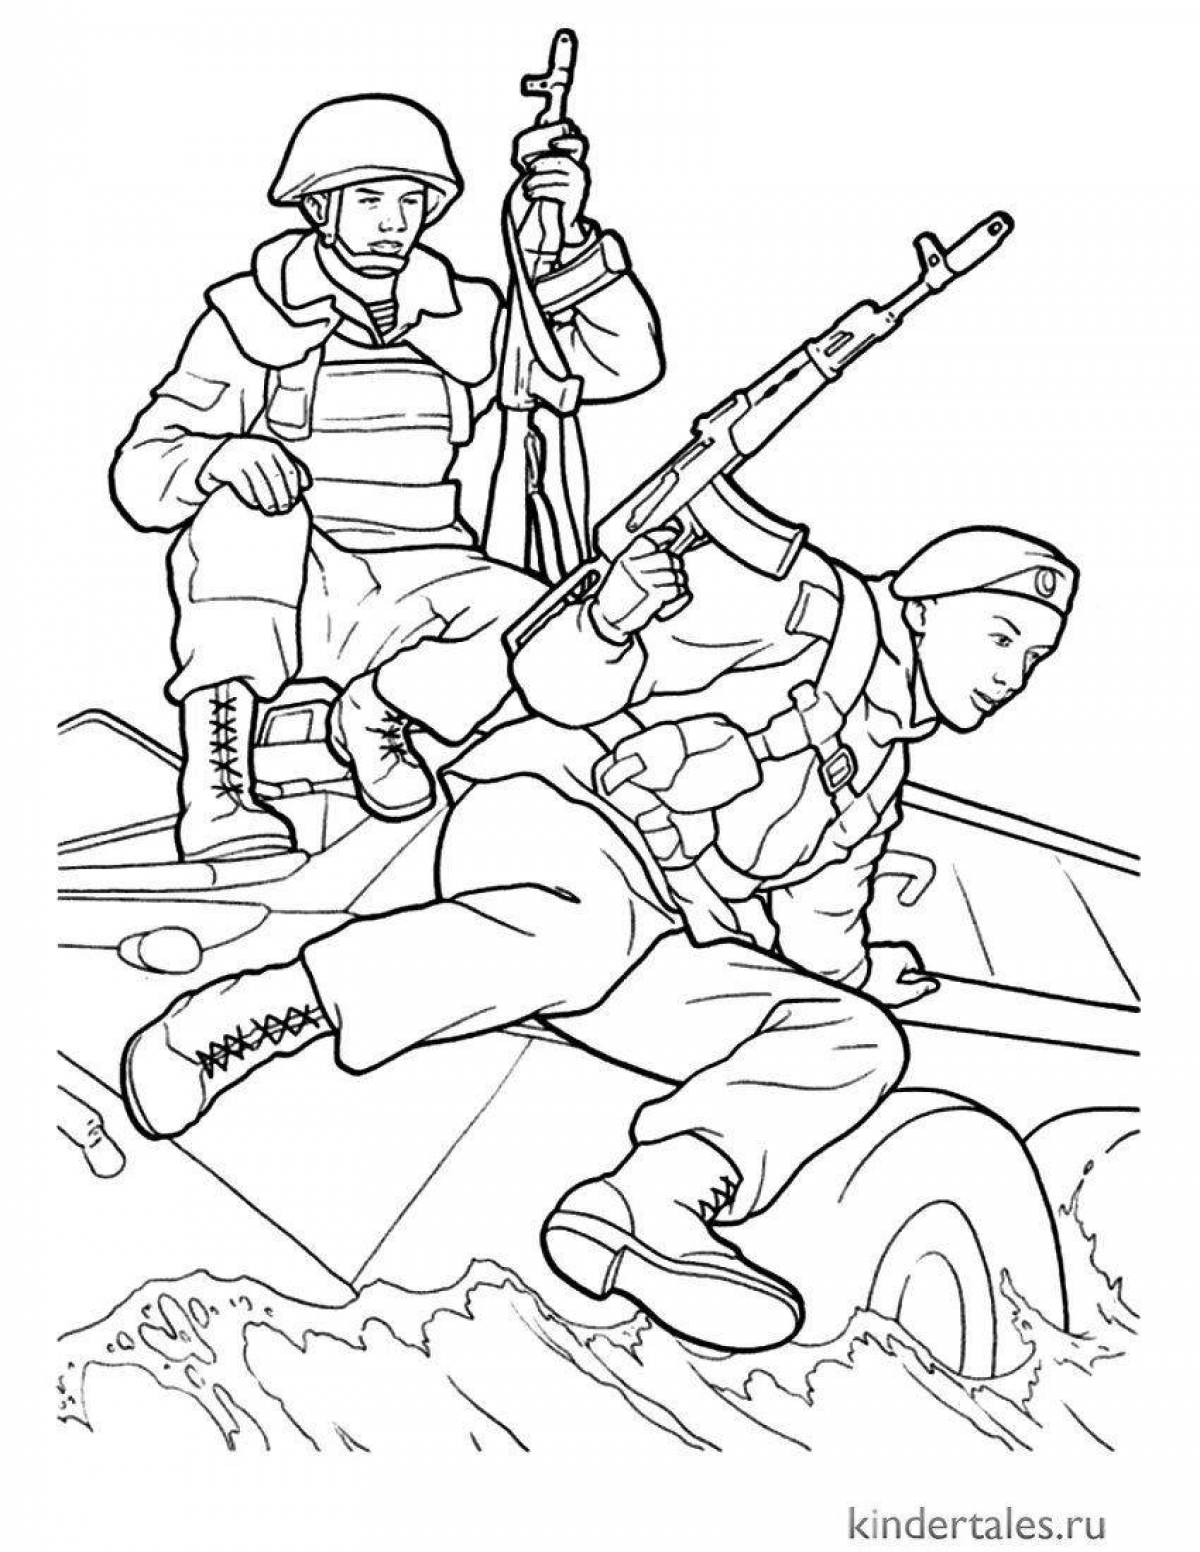 Coloring witty soldier 23 February